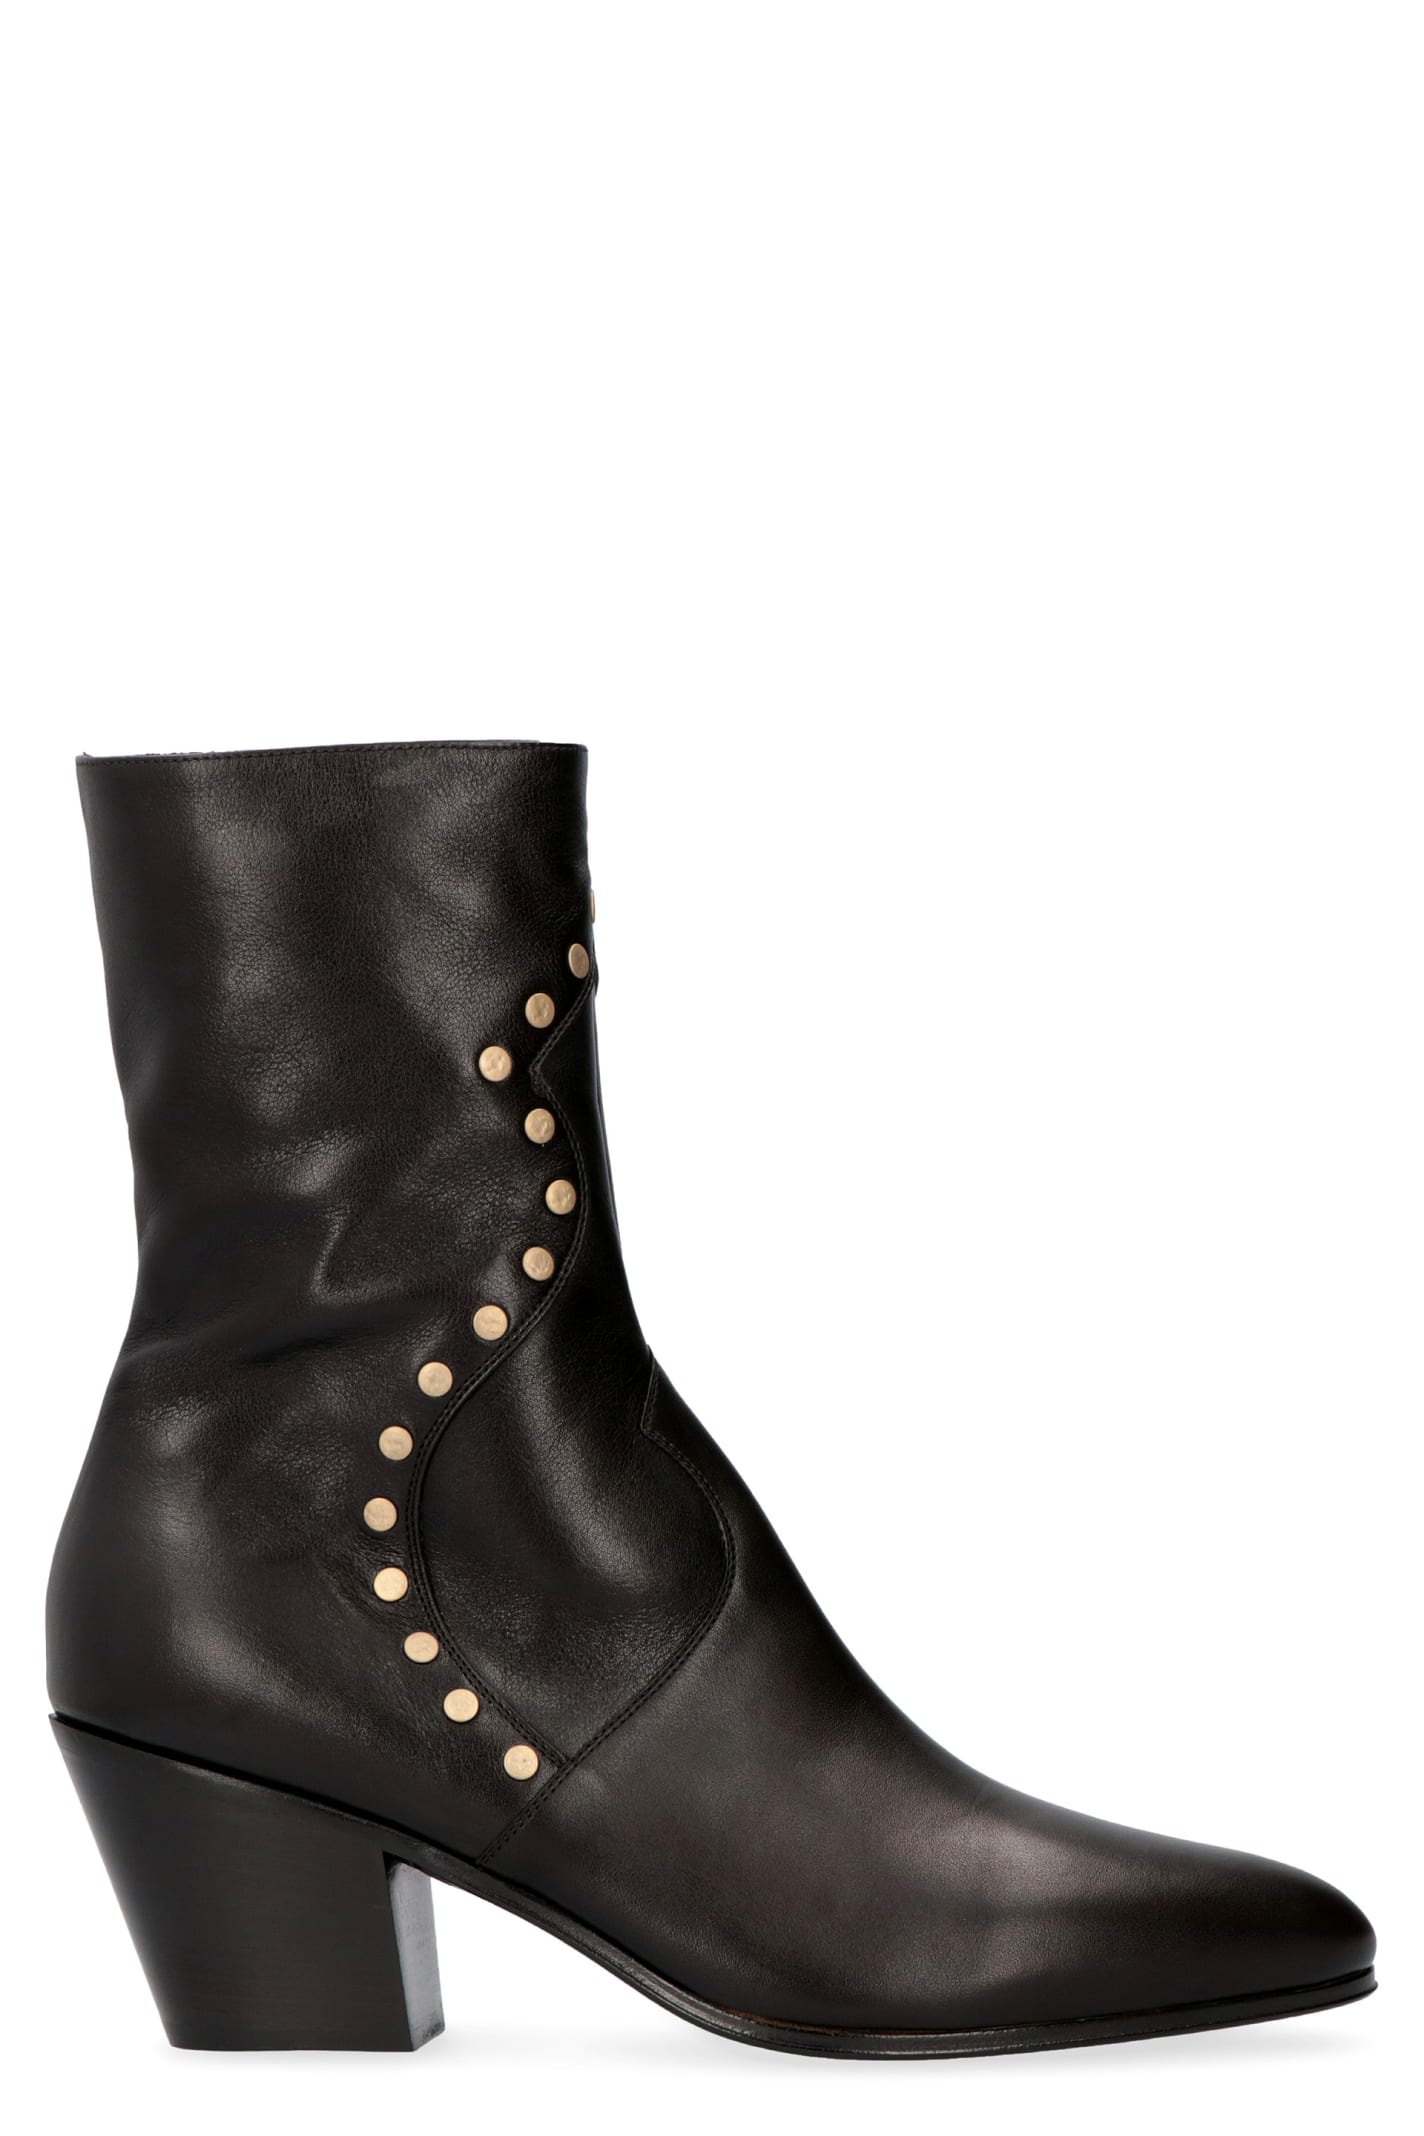 Celine Studded Leather Ankle Boots